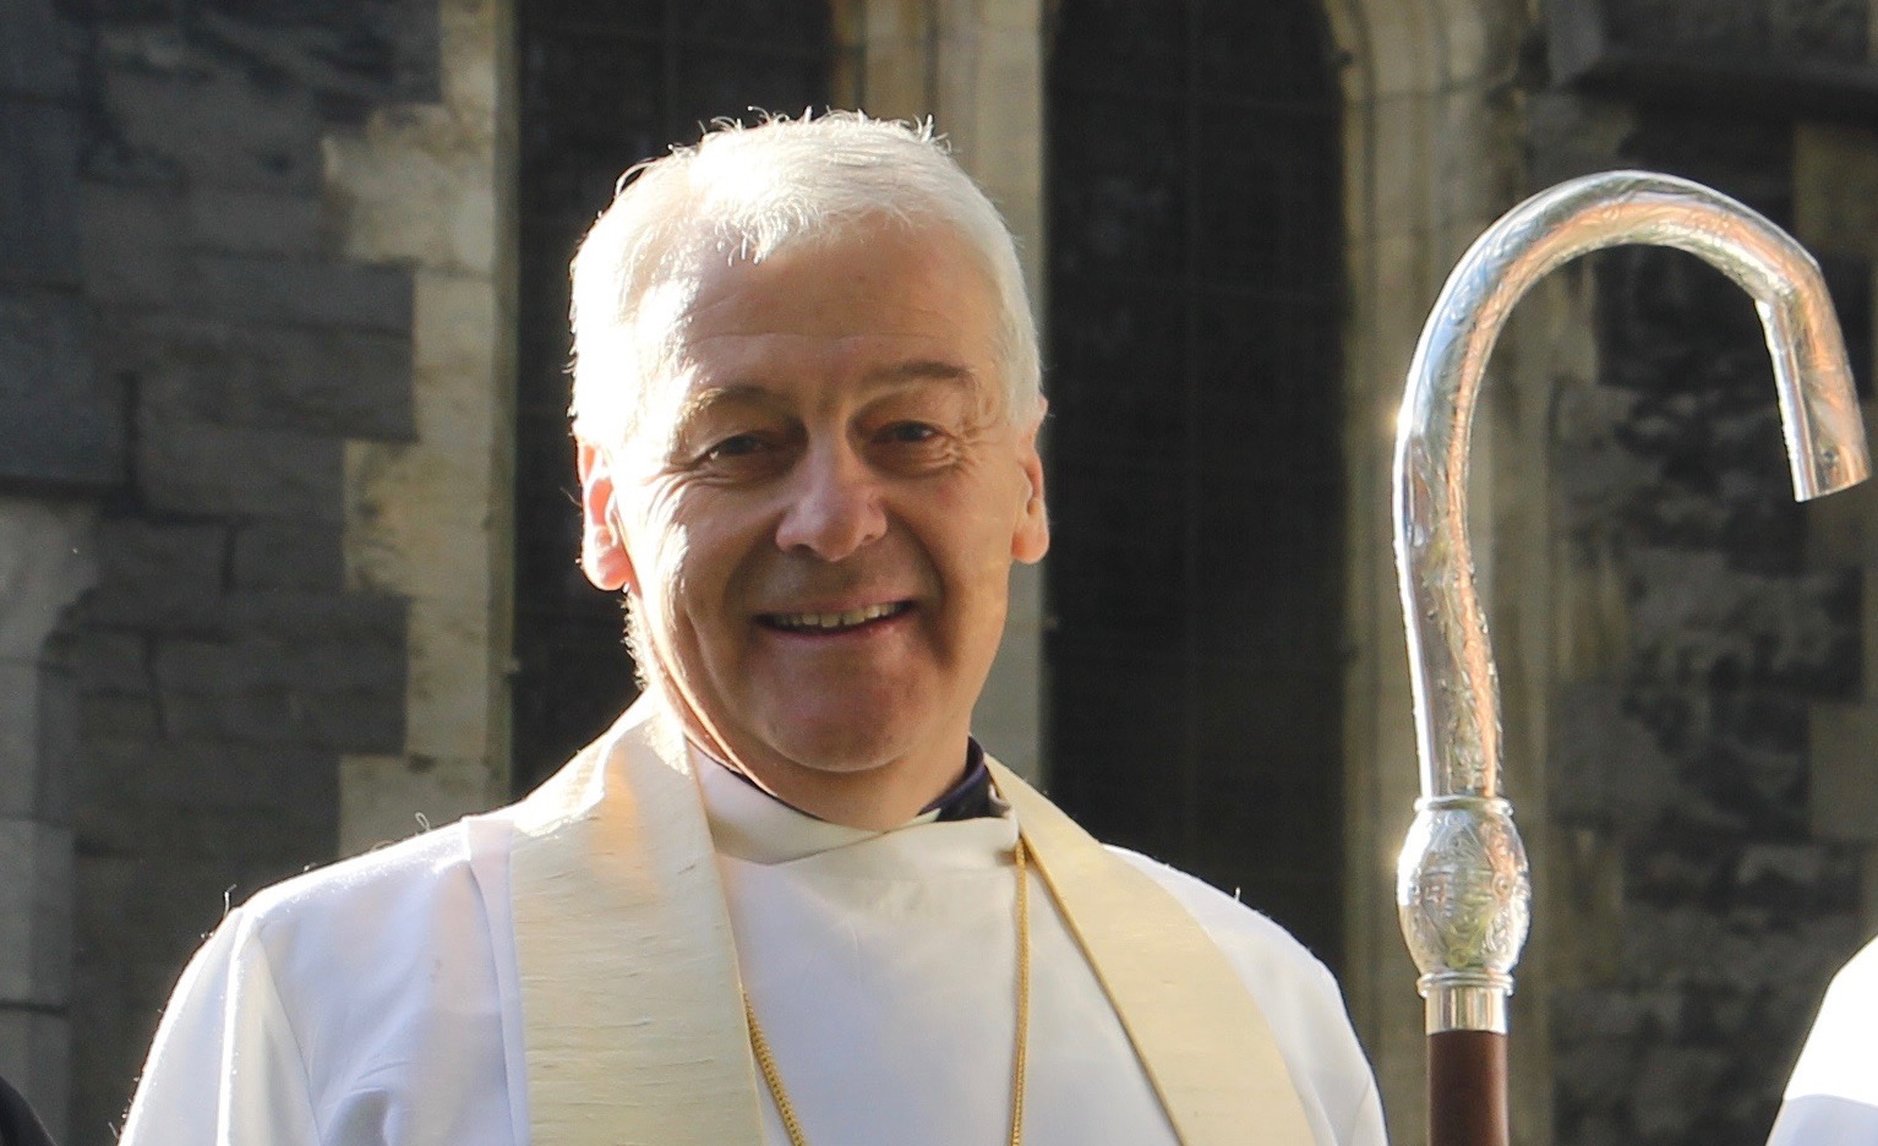 ‘Give the good and you will find the good’ – Easter Day Sermon of the Archbishop of Dublin